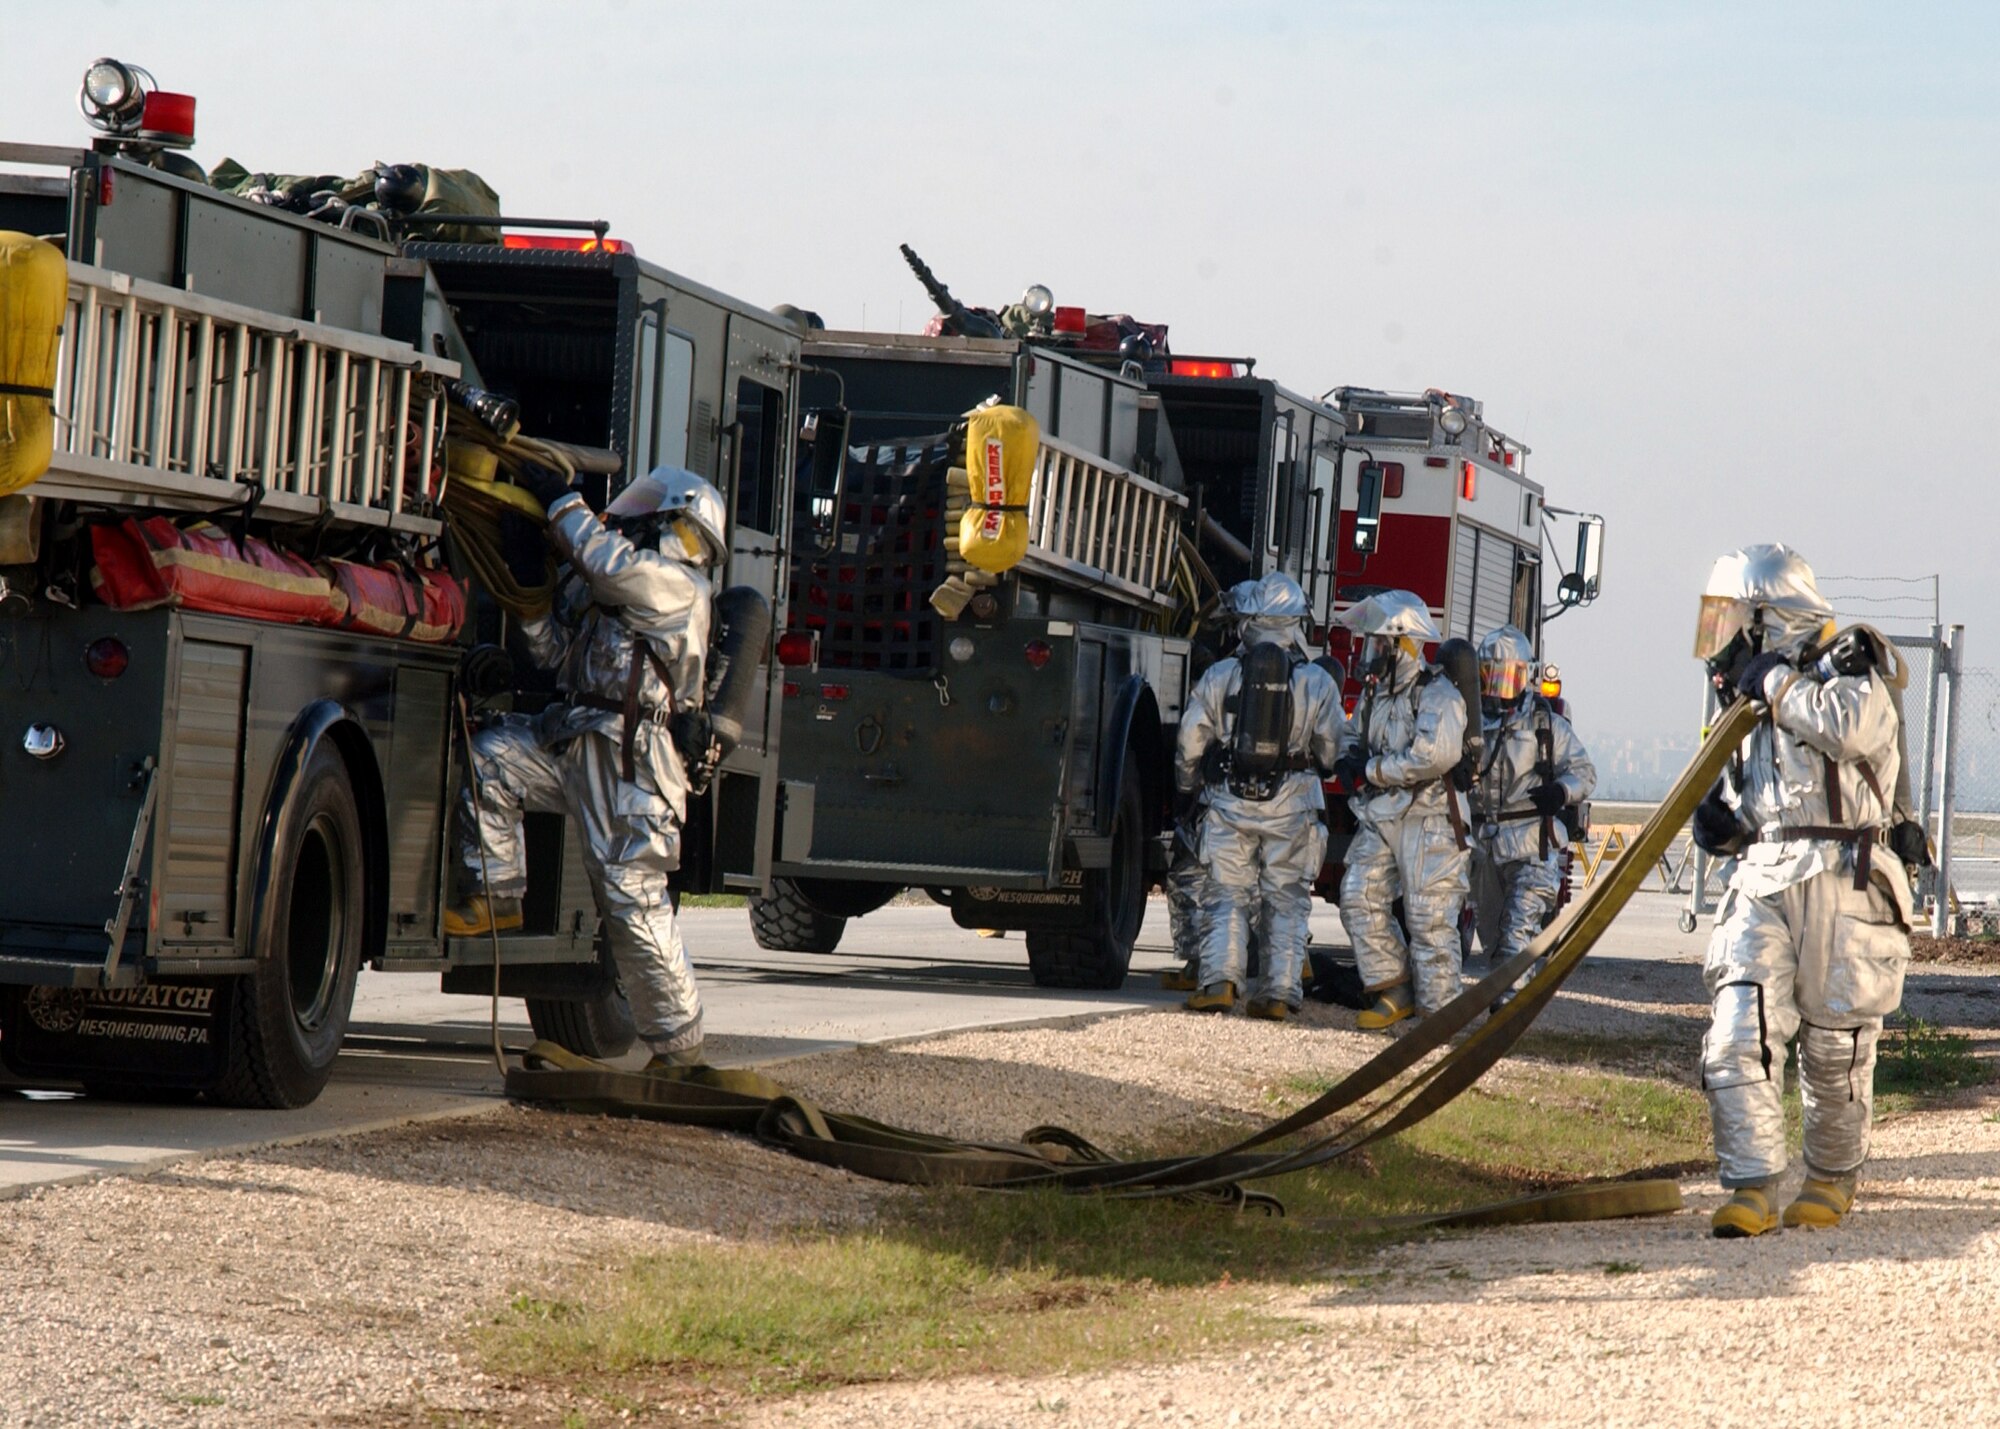 Incirlik Air Base firefighters from Engines 12 and 13 respond to a fire during an exercise Nov. 20. Incirlik firefighters conduct structural fire exercises in their new training facility quarterly. (U.S. Air Force photo by Airman Kelly LeGuillon)                                              